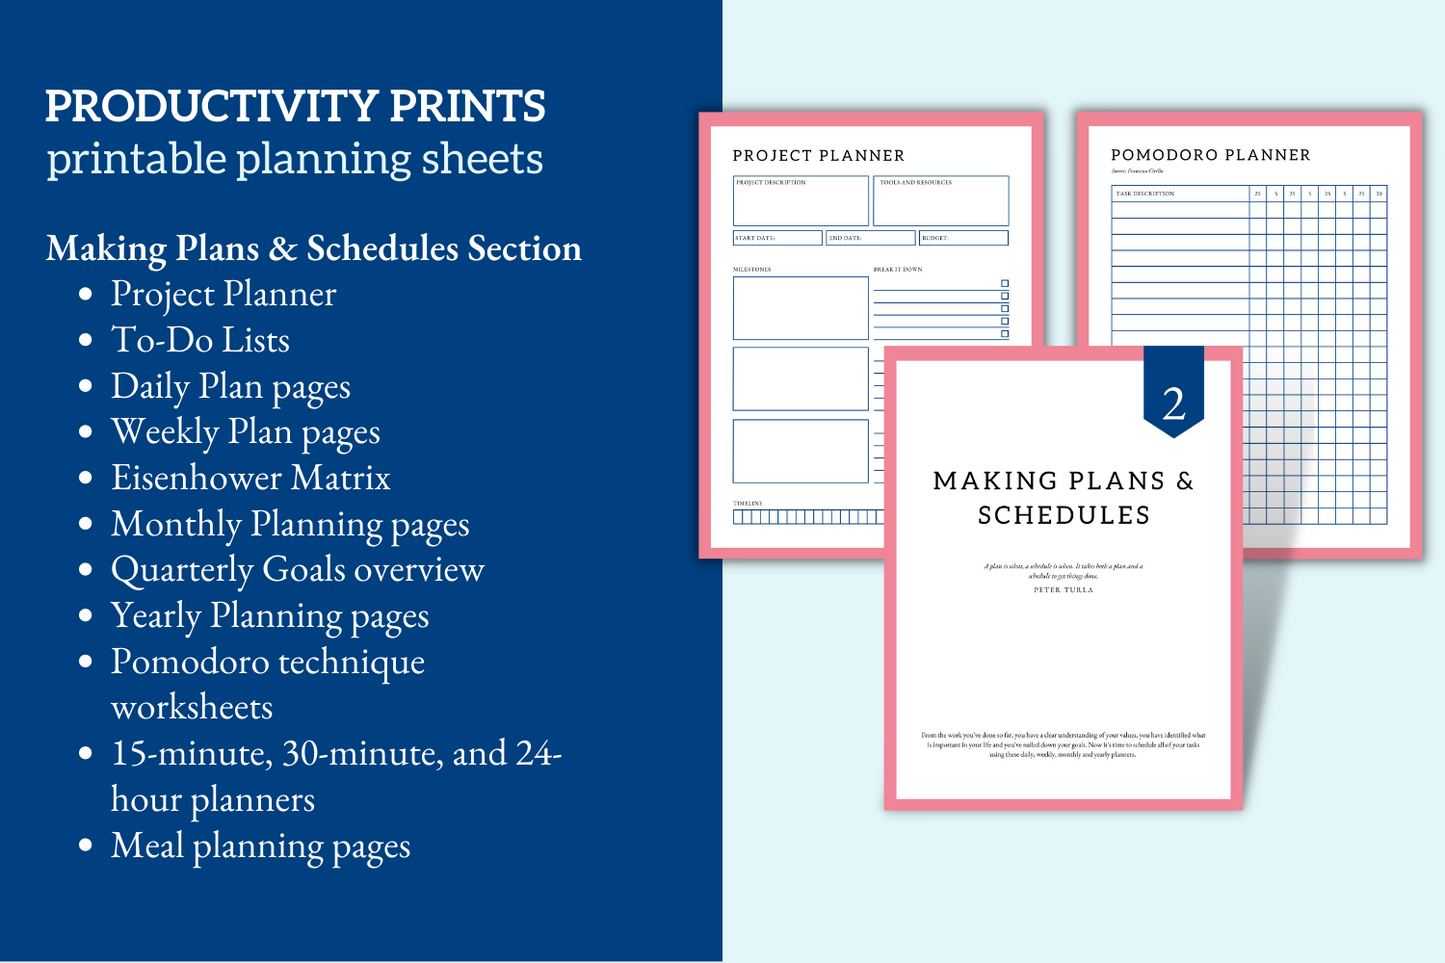 Making Plans and Schedules section in Productivity Prints printable planning sheets.